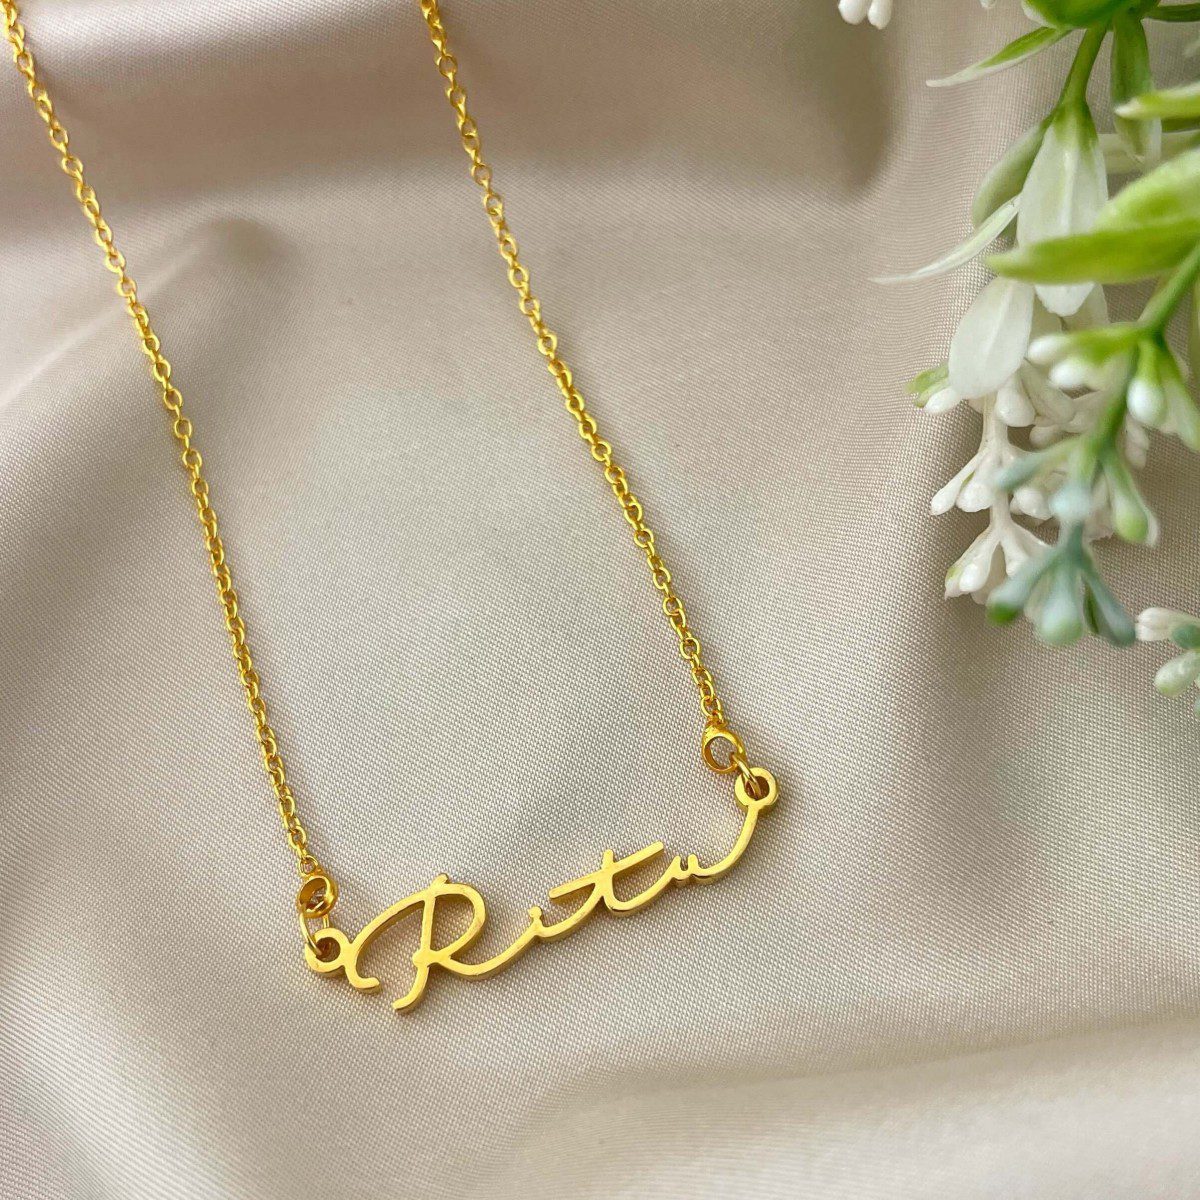 name necklace ankx 15